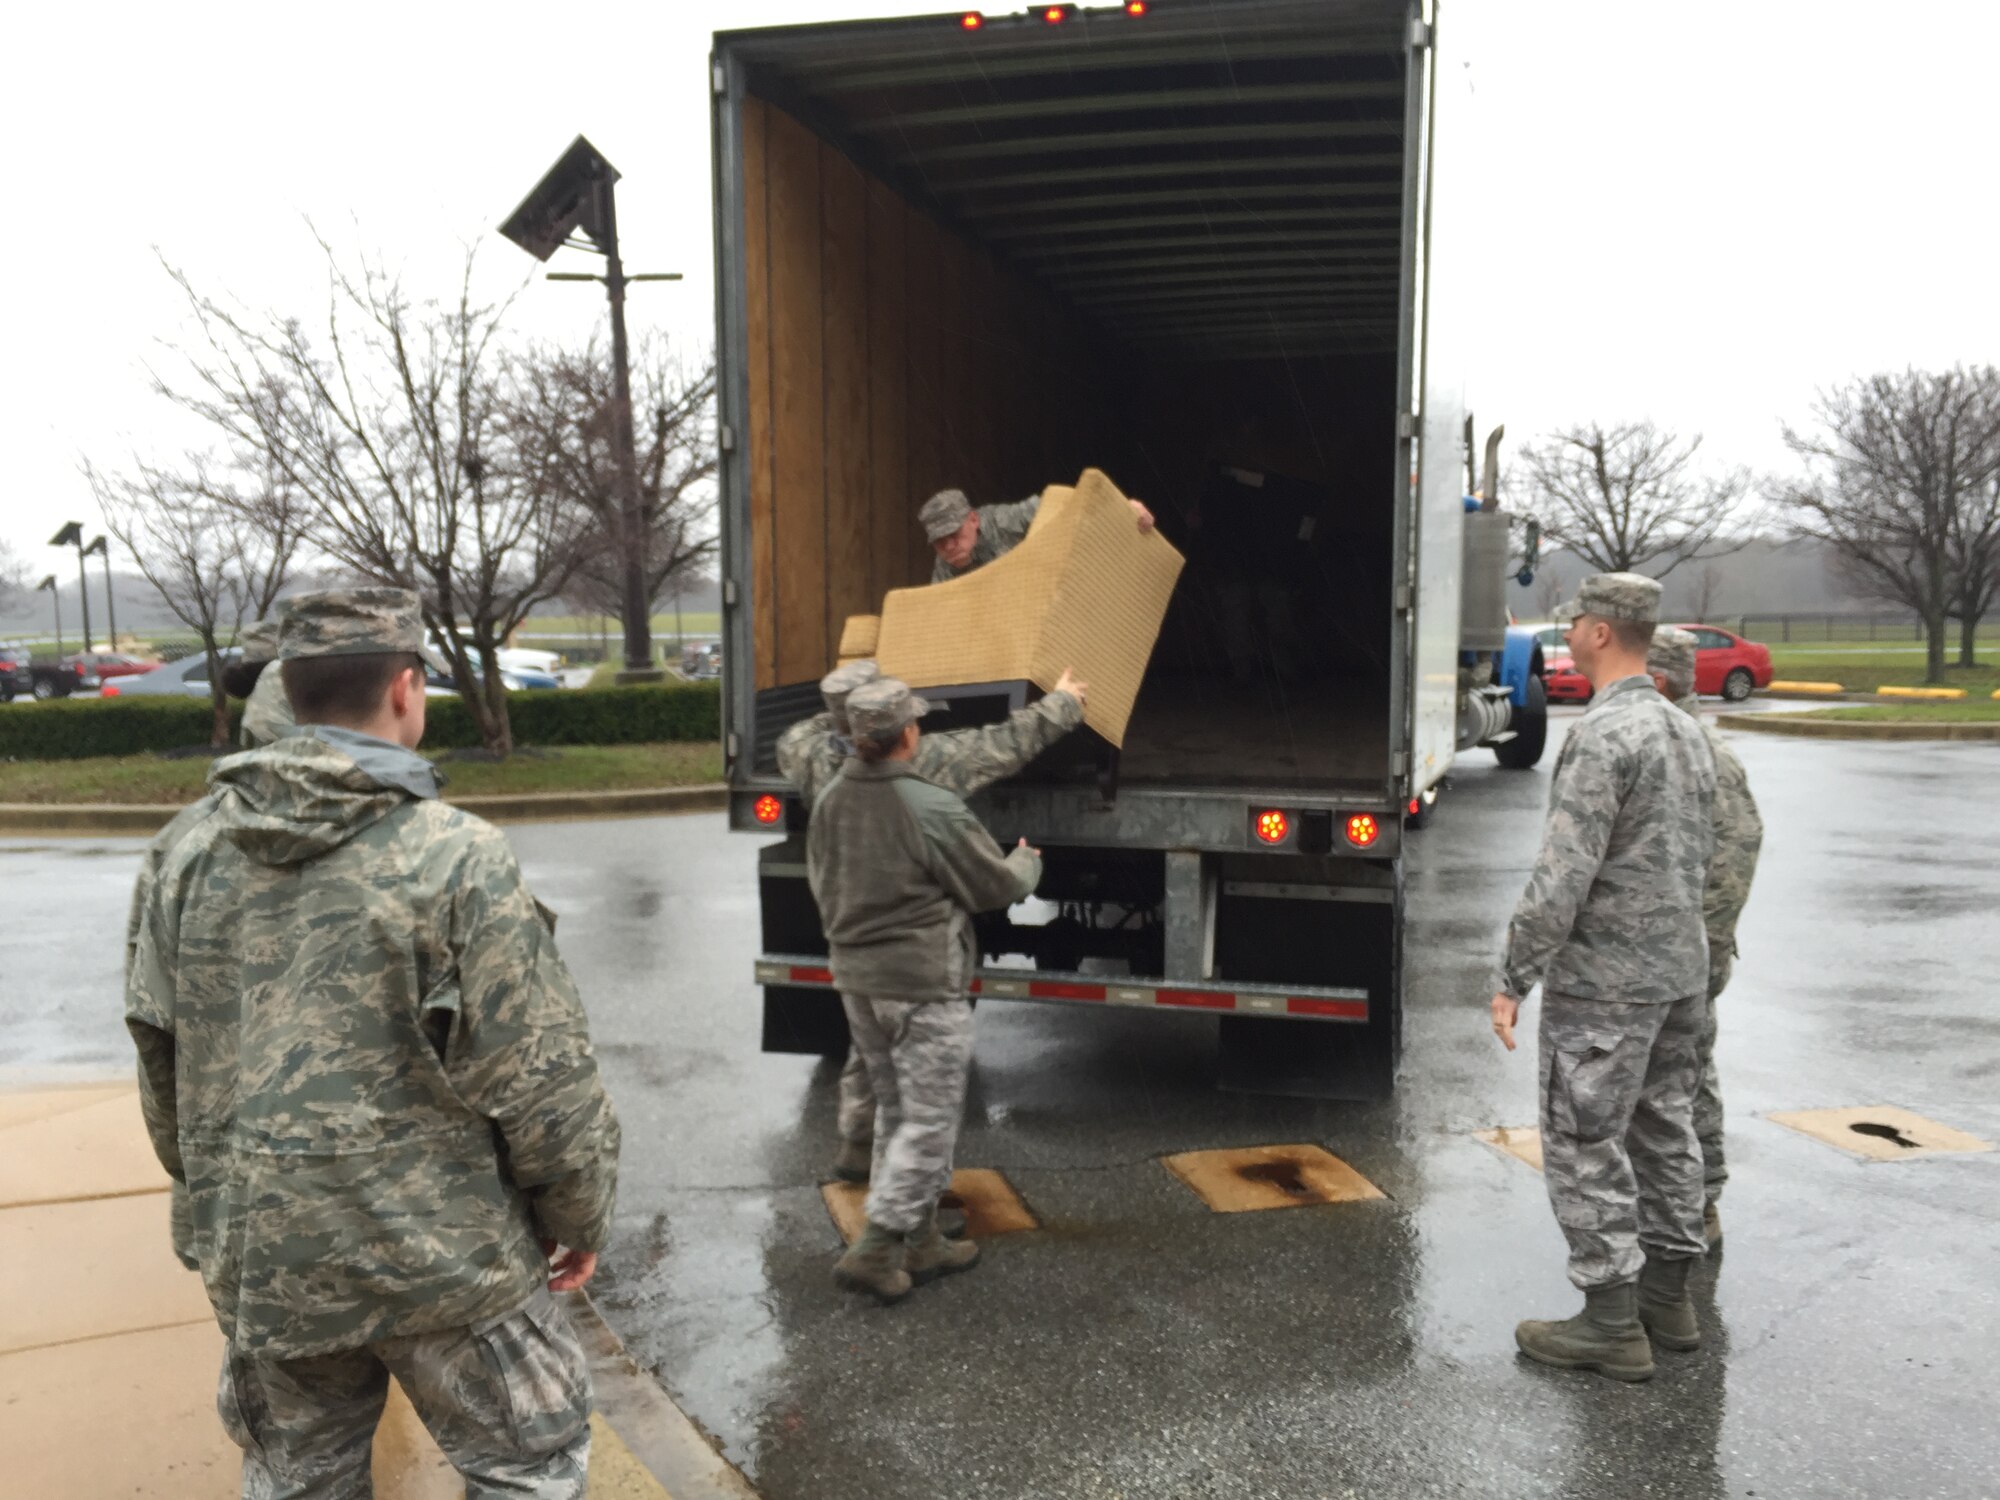 Tech. Sgt. Jared Whitecar, Air Force Mortuary Affairs Operations broadcaster, unloads a chair from a tractor trailer Dec. 23, 2015 at New Castle Air National Guard Base, Del. The furniture was relocated from Dover Air Force Base to create an area for families of the fallen when a dignified transfer was diverted due to weather. (U.S. Air Force photo/Roland Balik)